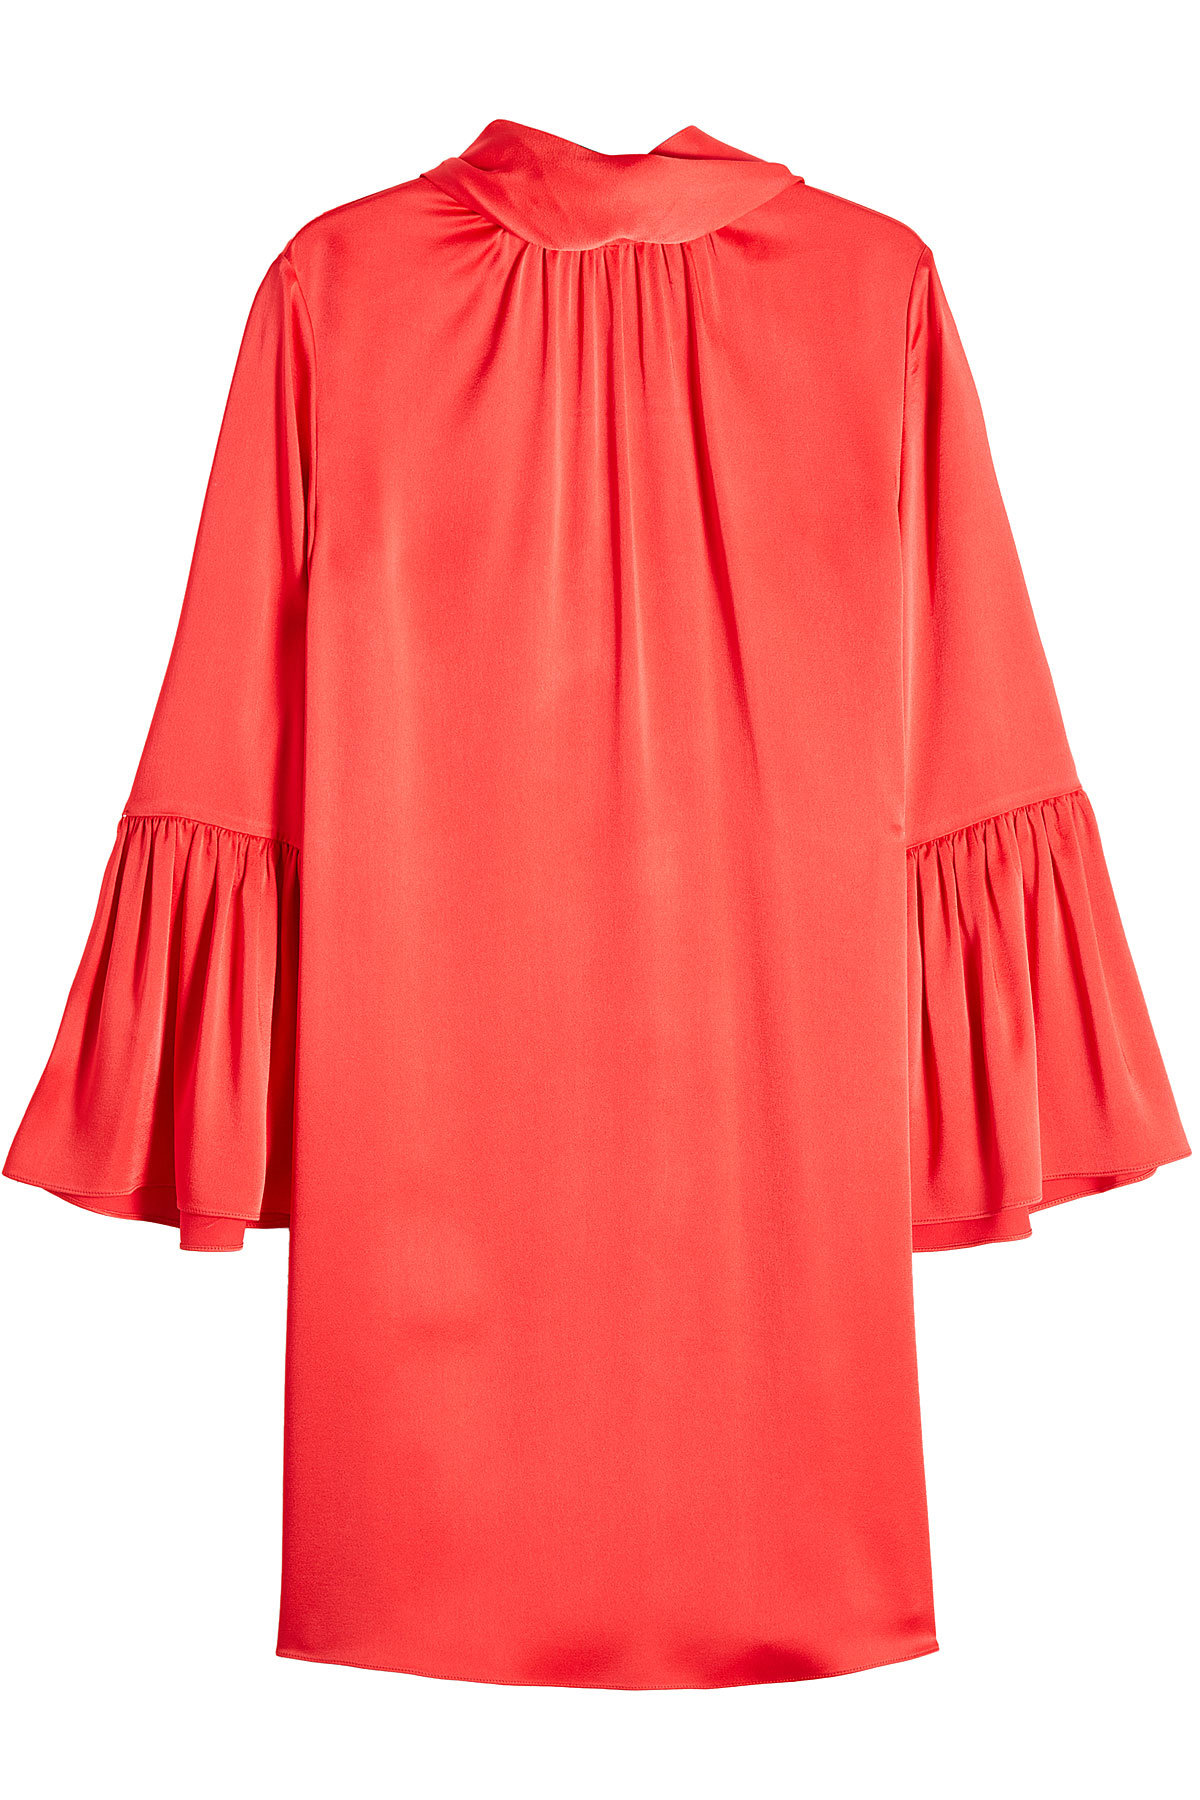 Fendi - Crepe Dress with Bell Sleeves